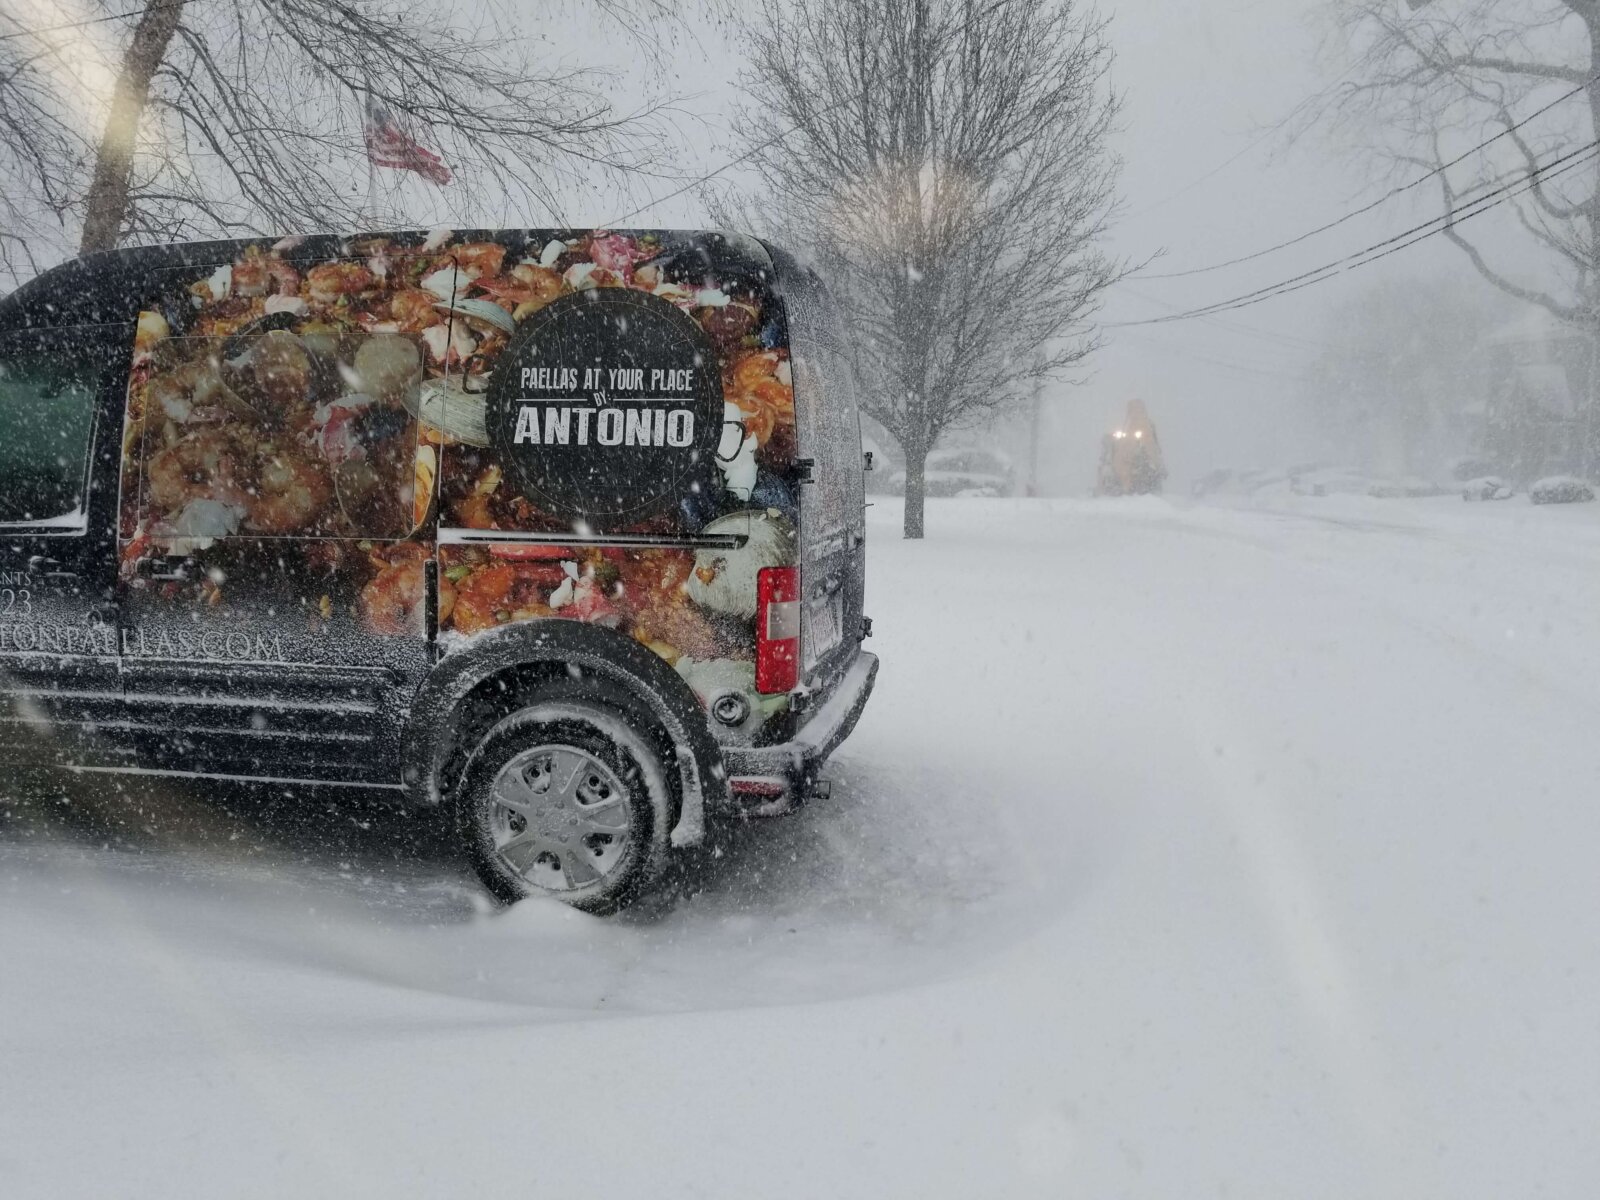 Paellas at your place by Antonio van in the snow